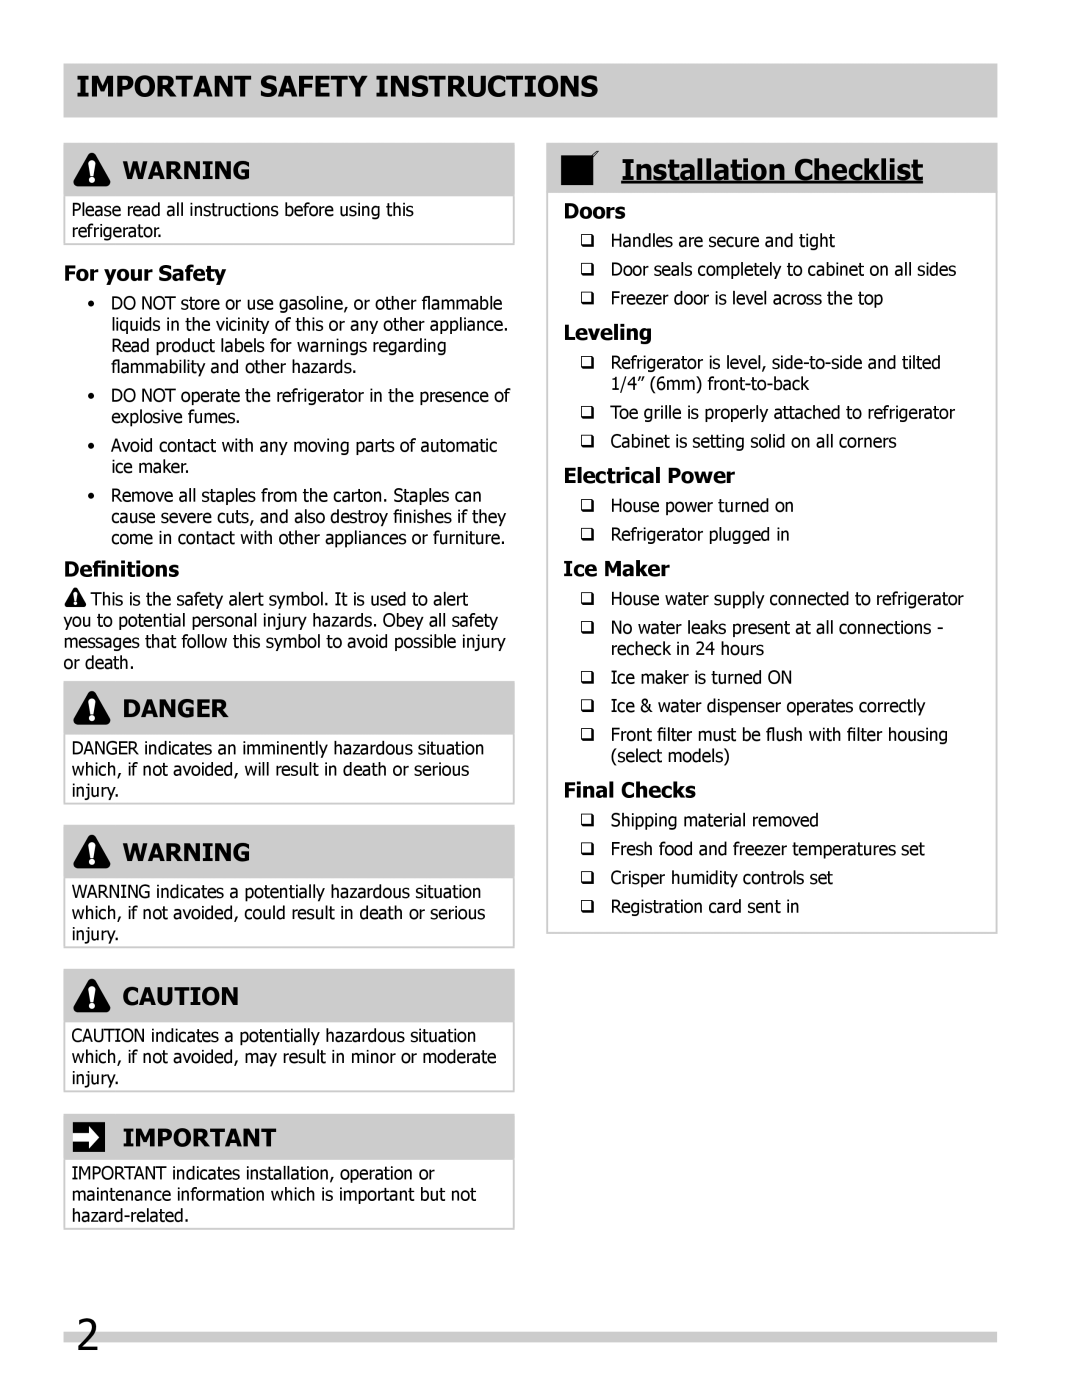 Frigidaire FFHT1715LB Important Safety Instructions, Installation Checklist, Danger, For your Safety, Definitions, Doors 